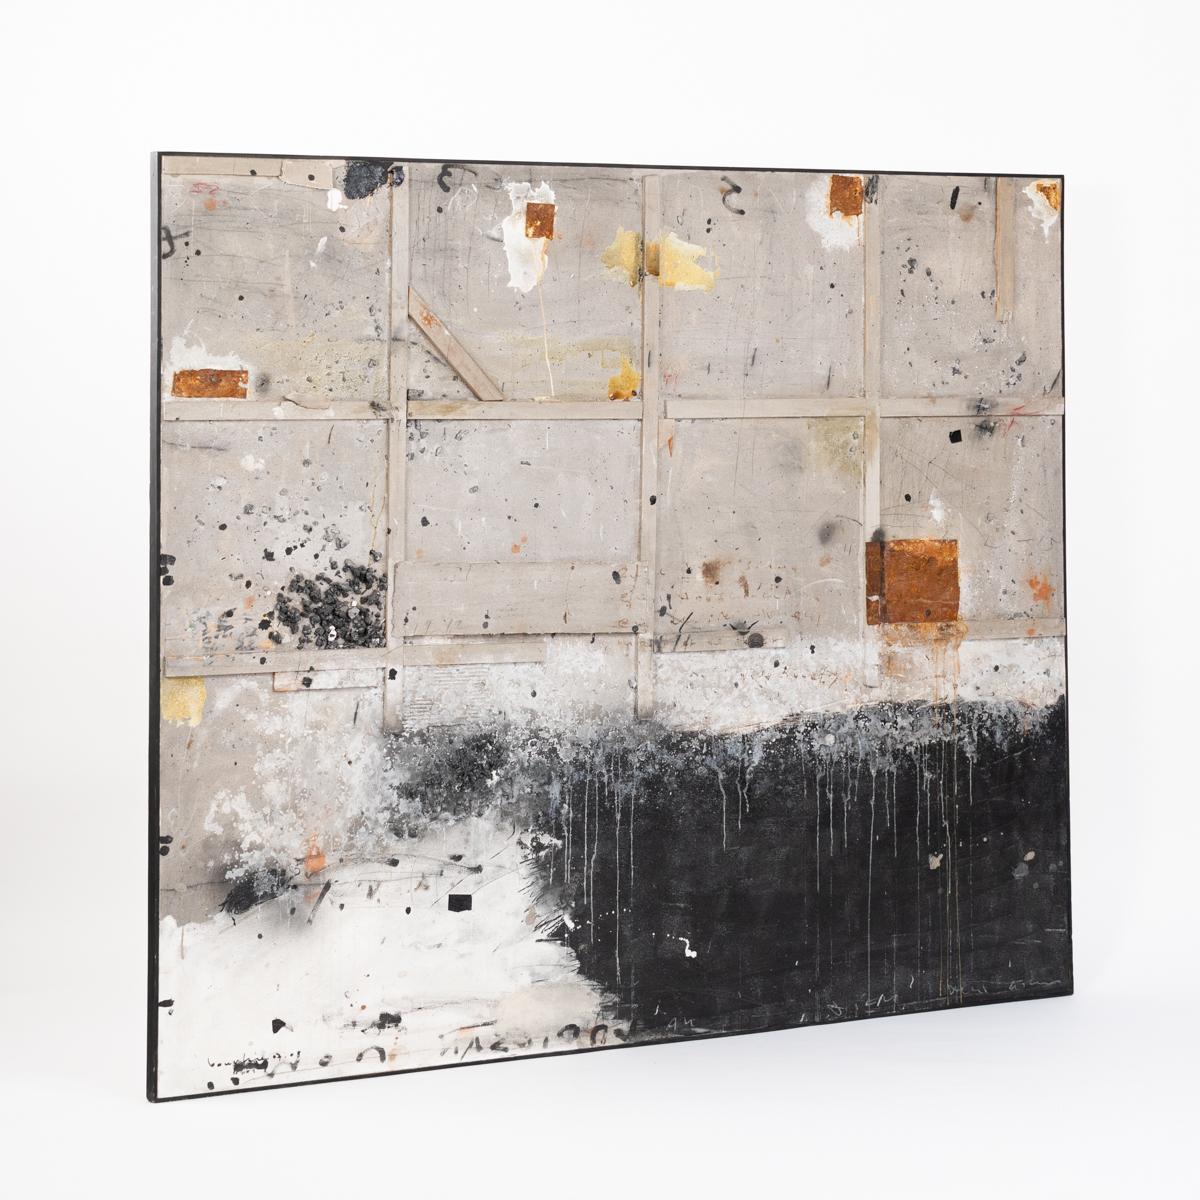 Abstract Painting Mixed Media in gray-white-rust-black by Hassan Bourkia Marrakesh 2008

Hassan Bourkia was born on December 19, 1956 in El Ksiba, near Beni Mellal. He is a writer, translator and visual artist. He has been teaching literature since